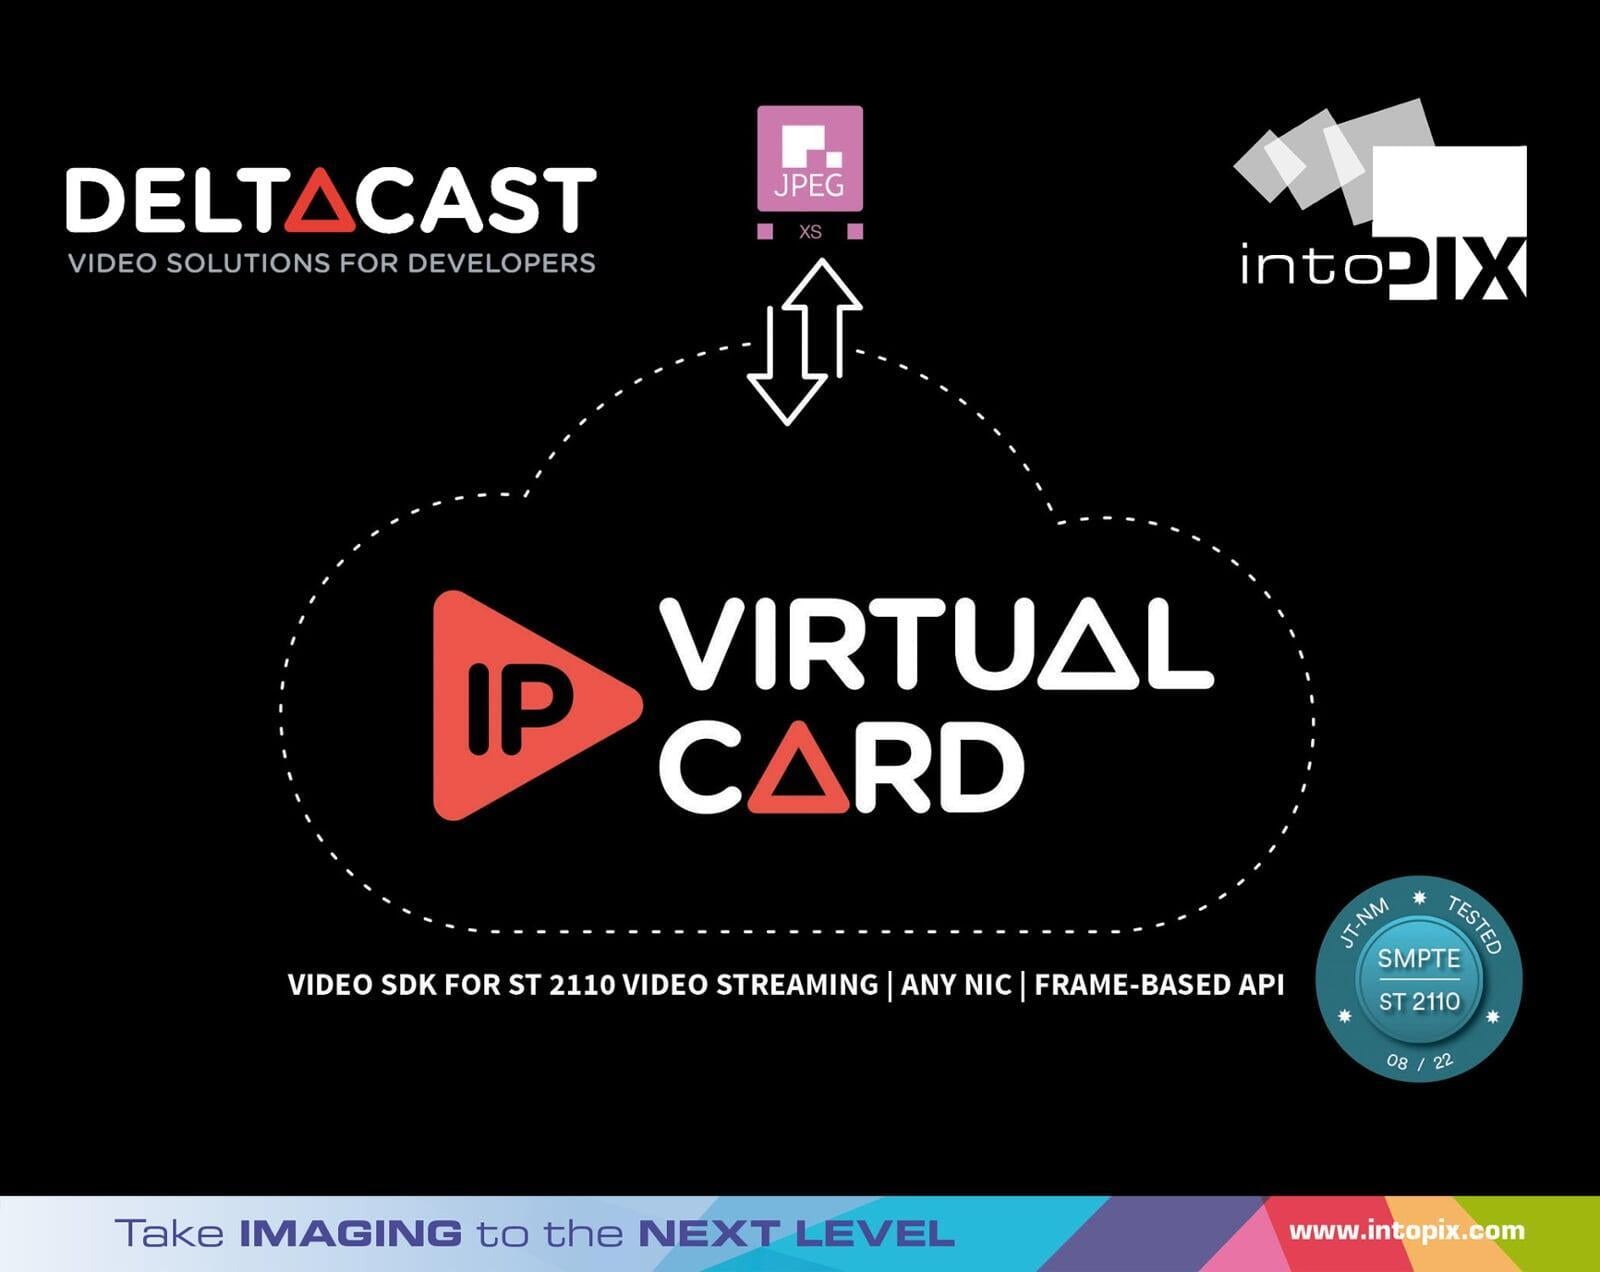 DELTACAST announces low-bitrate SMPTE 2110-22 video streaming support in its IP Virtual Card with intoPIX JPEG XS software